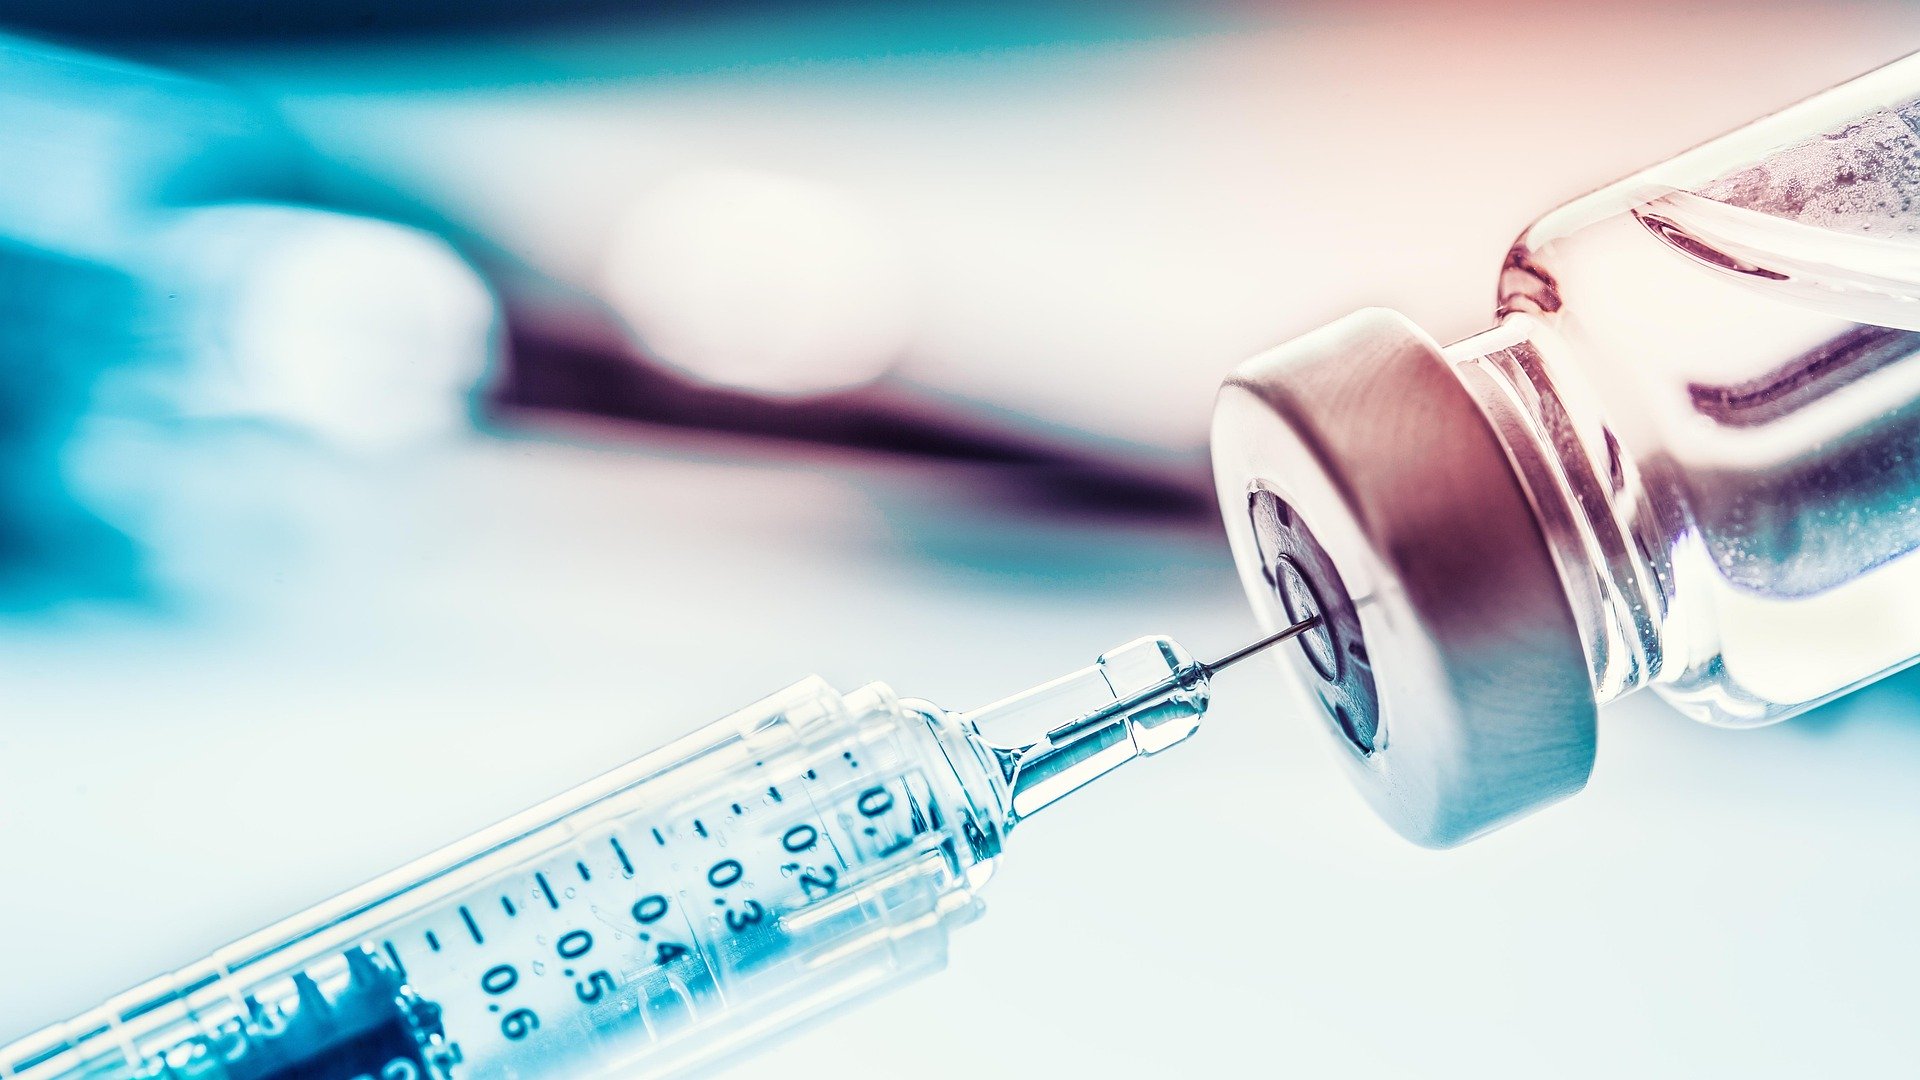 With the current state of the COVID-19 vaccine rollout in Australia, is it time to consider a National Vaccine Compensation Scheme?